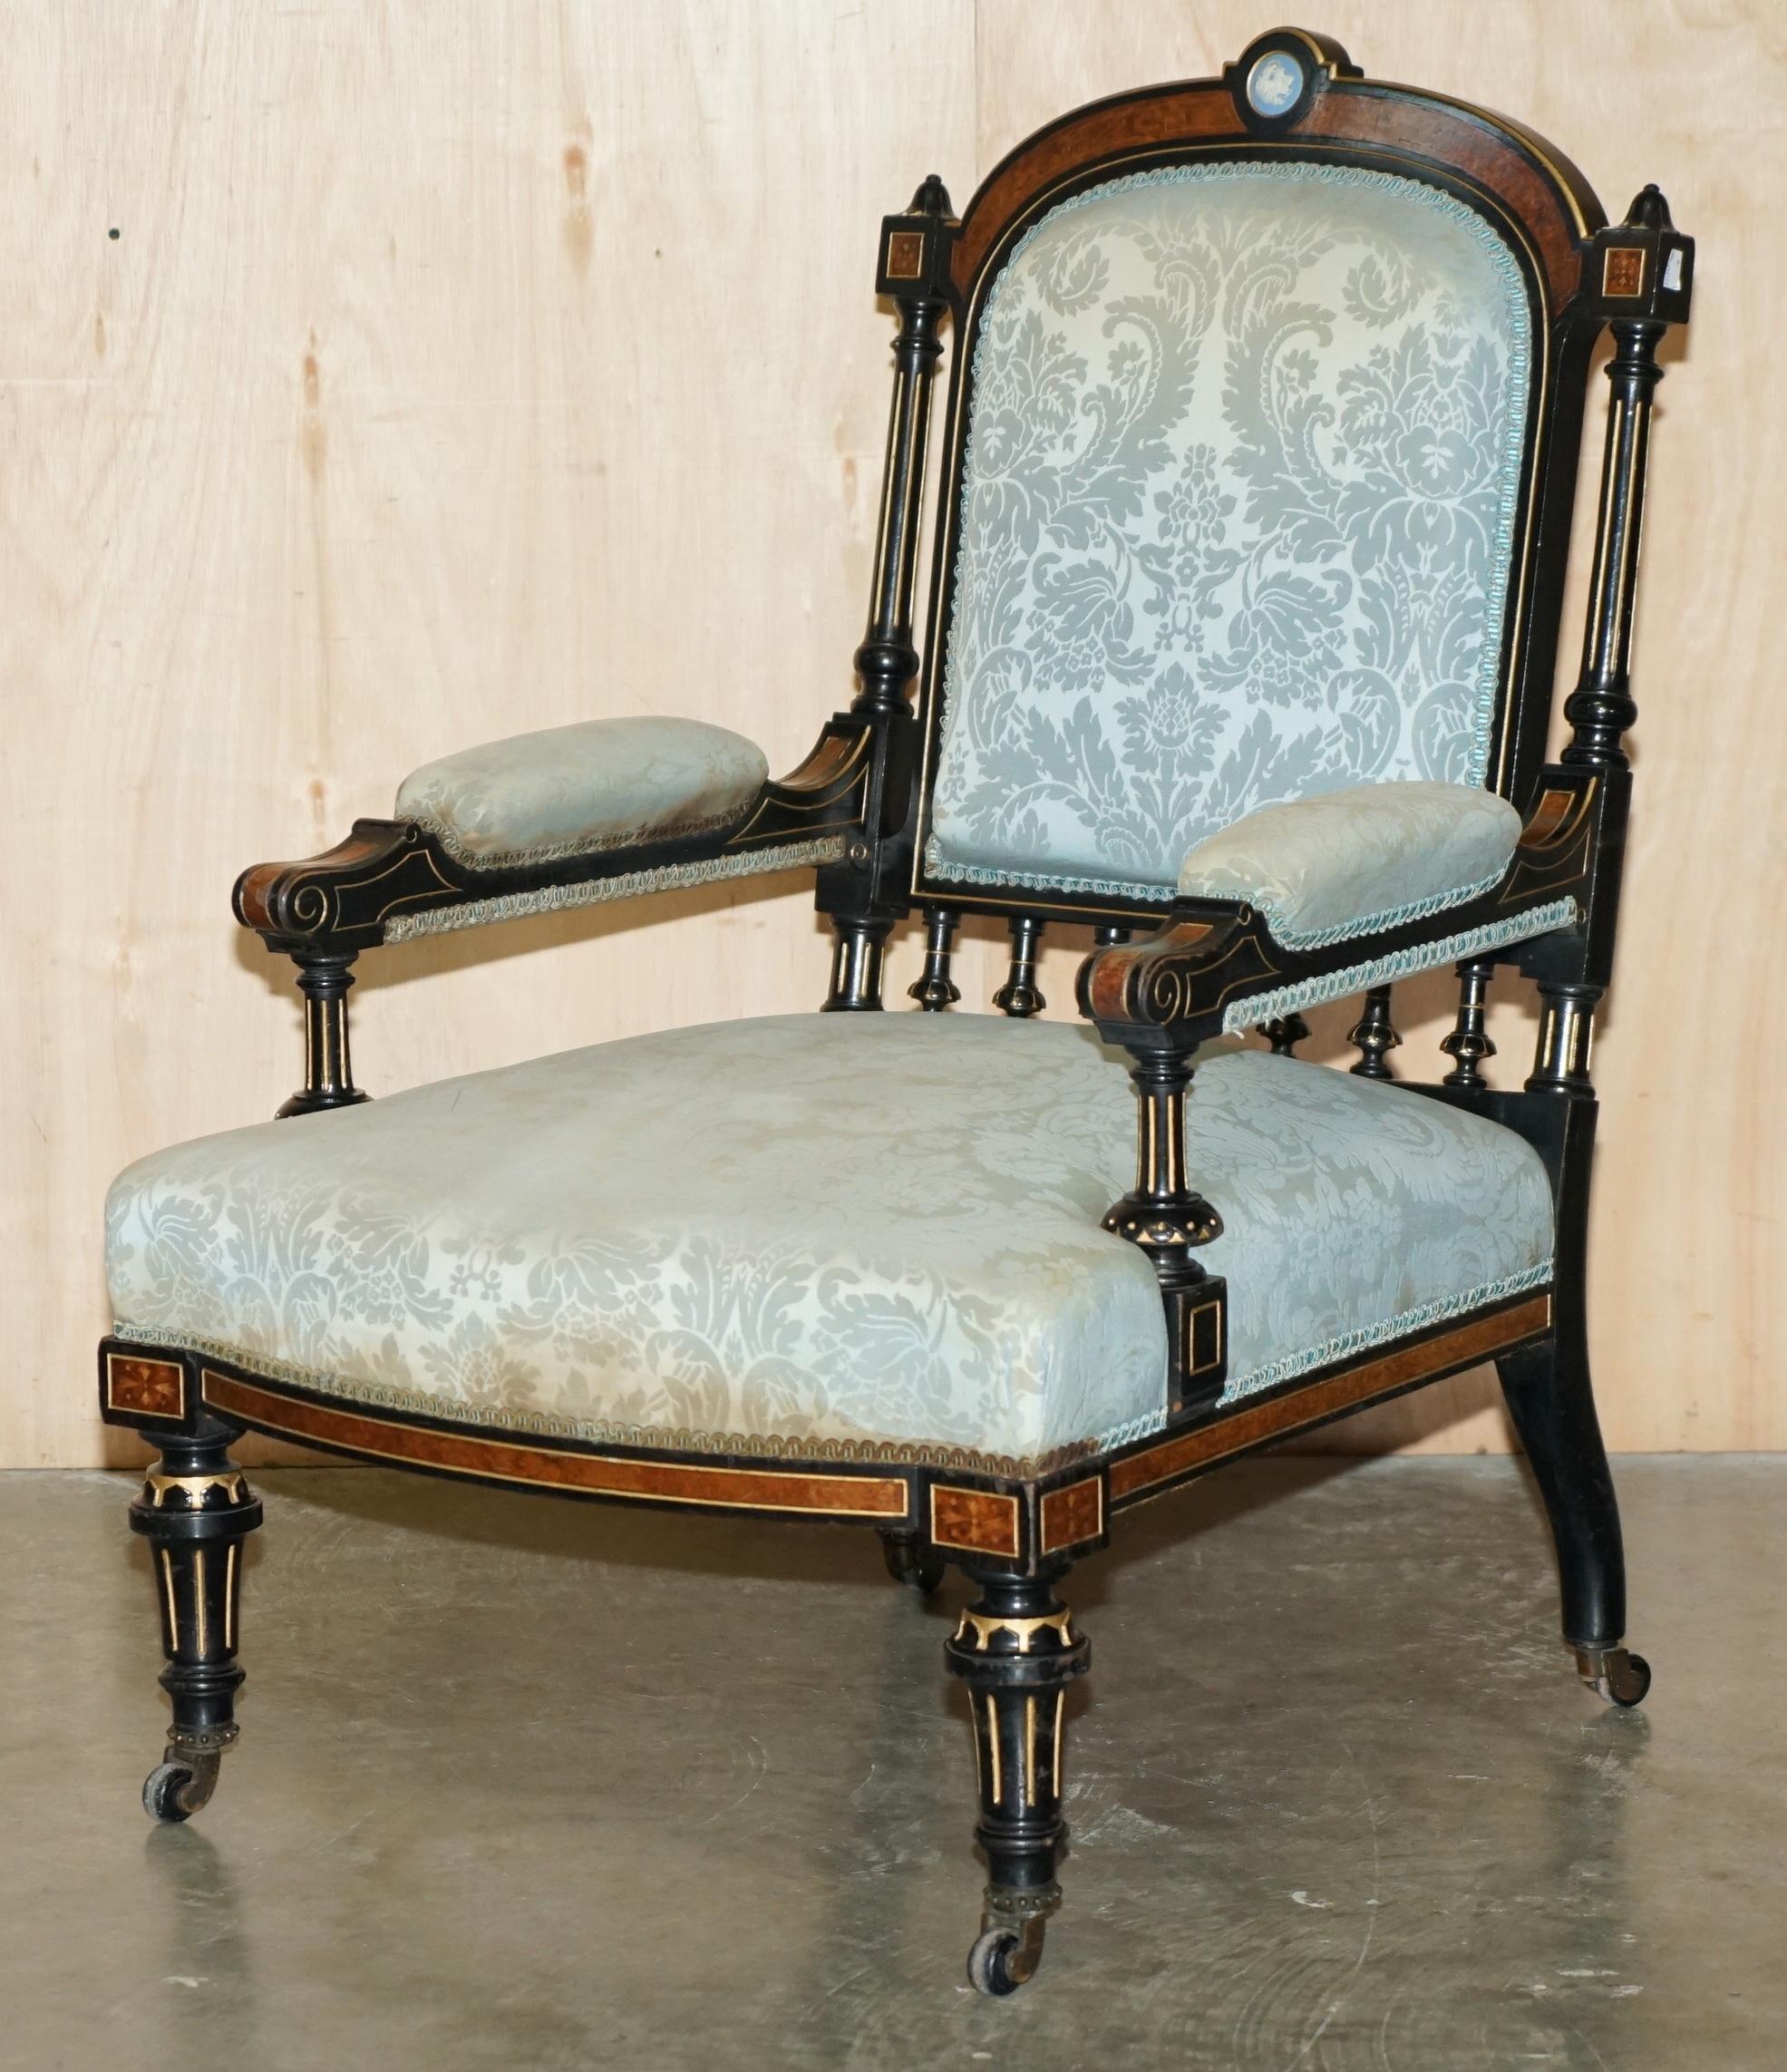 Royal House Antiques


Royal House Antiques is delighted to offer for sale pair of very rare, highly collectable Burr Walnut & Ebony framed Victorian Aesthetic Movement armchairs with a inset Grand Tour plaques that are part of a suite 

Please note